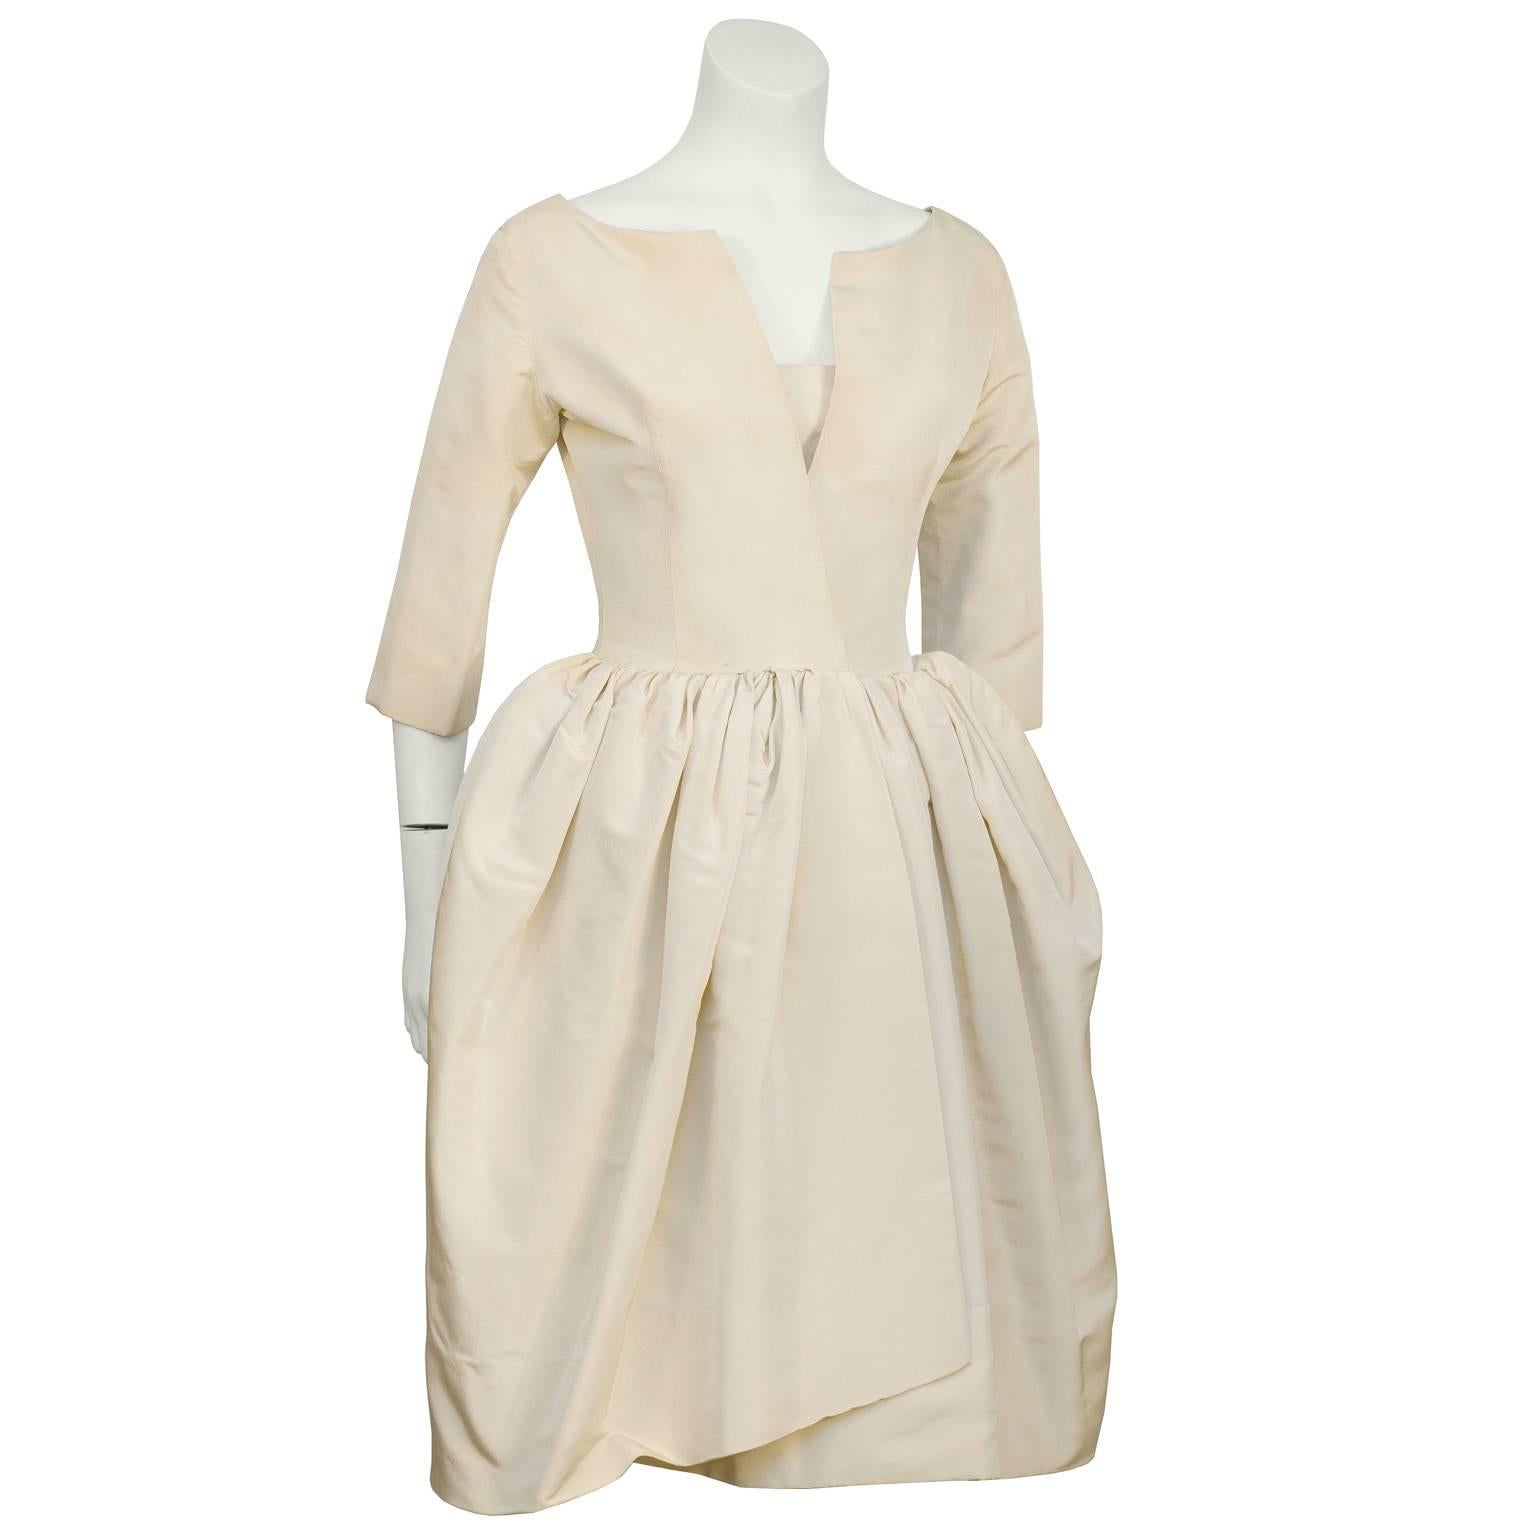 Pre 1957 Christian Dior beige silk robe du soir cocktail dress.  Unique example of one of the first French couture partnerships with a North American luxury department store. All hand stitched. Fitted waist with a slit overlay neckline and half